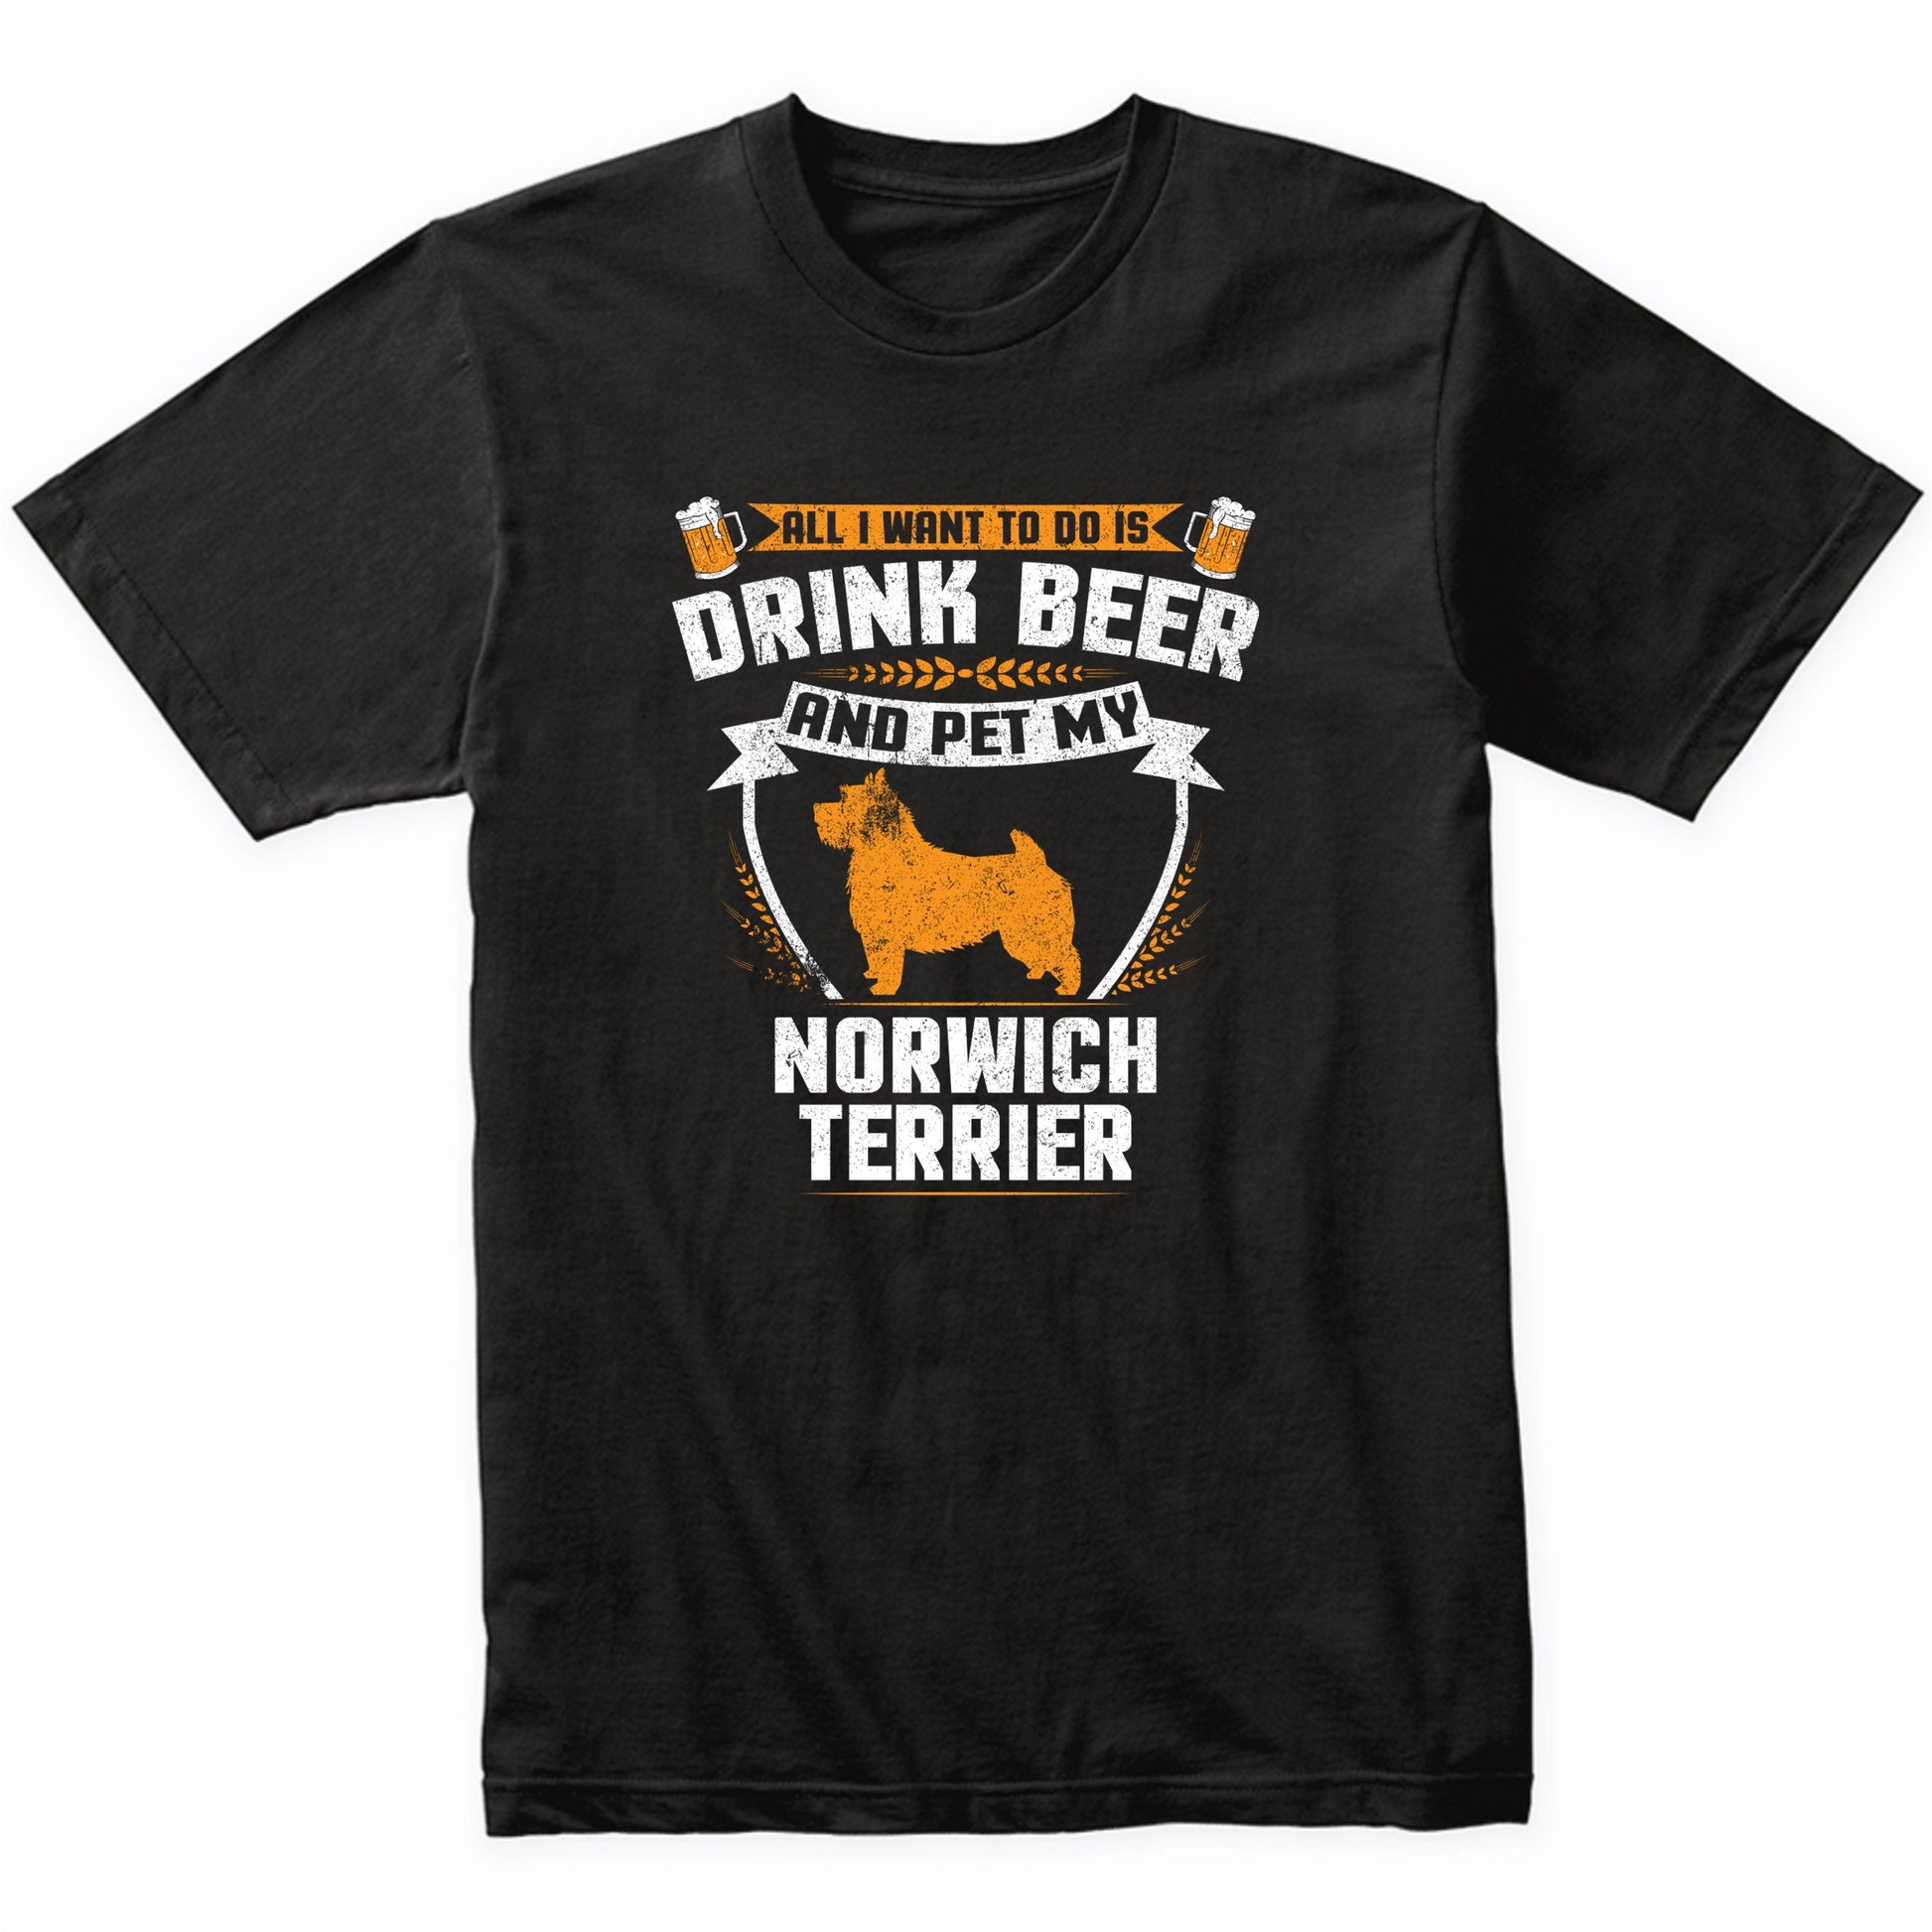 All I Want To Do Is Drink Beer And Pet My Norwich Terrier Funny Dog Owner Shirt